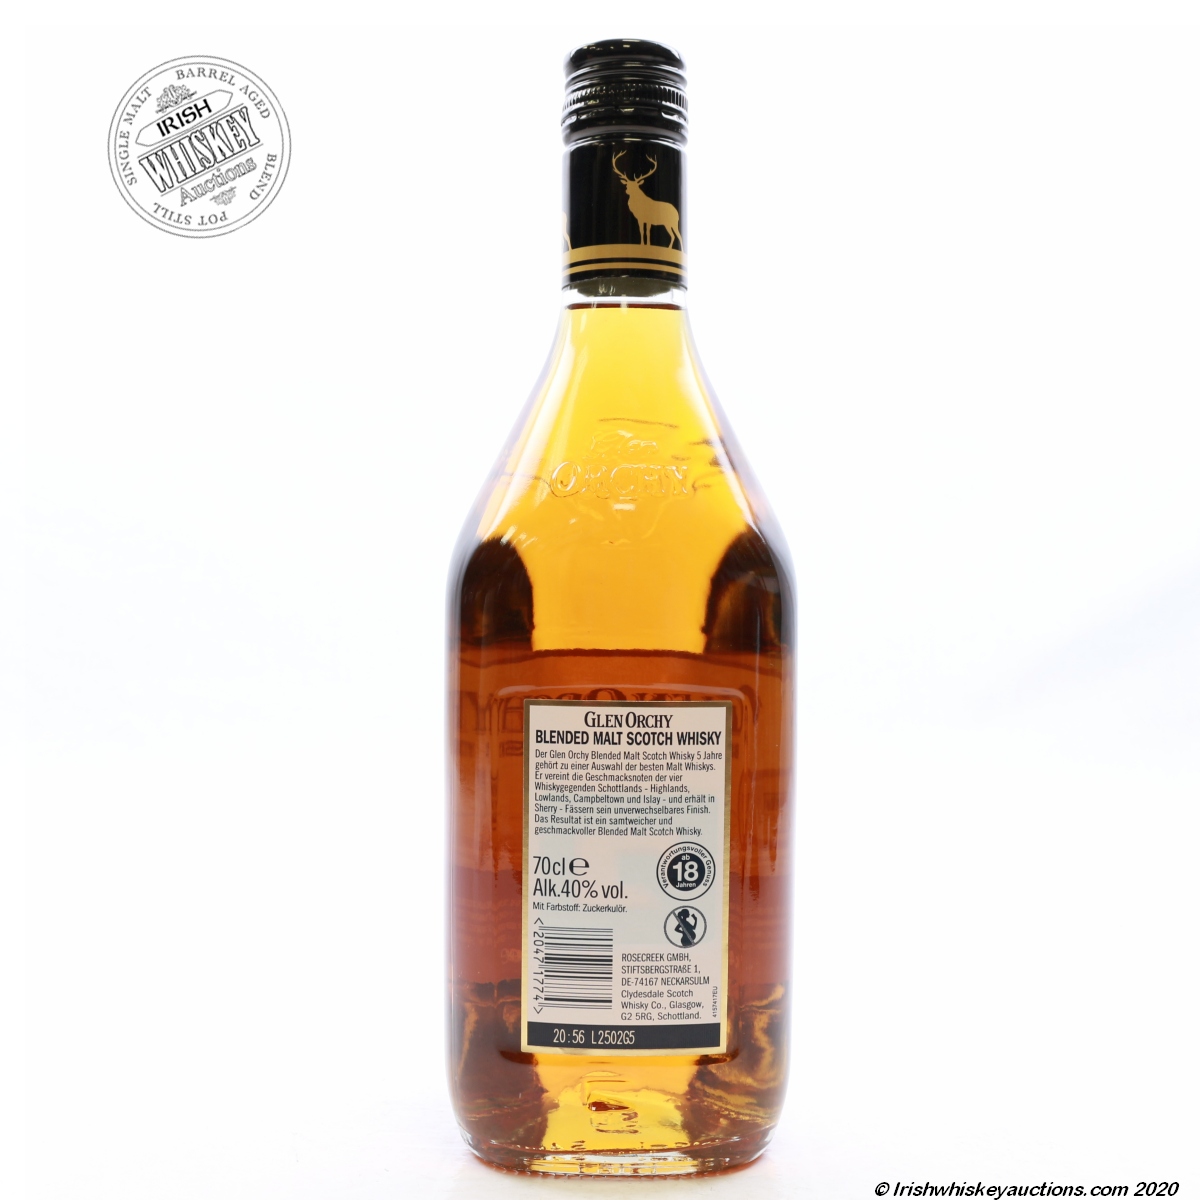 Irish Whiskey Old Year Whisky Glen Blended Scotch Auctions 5 | Orchy Malt